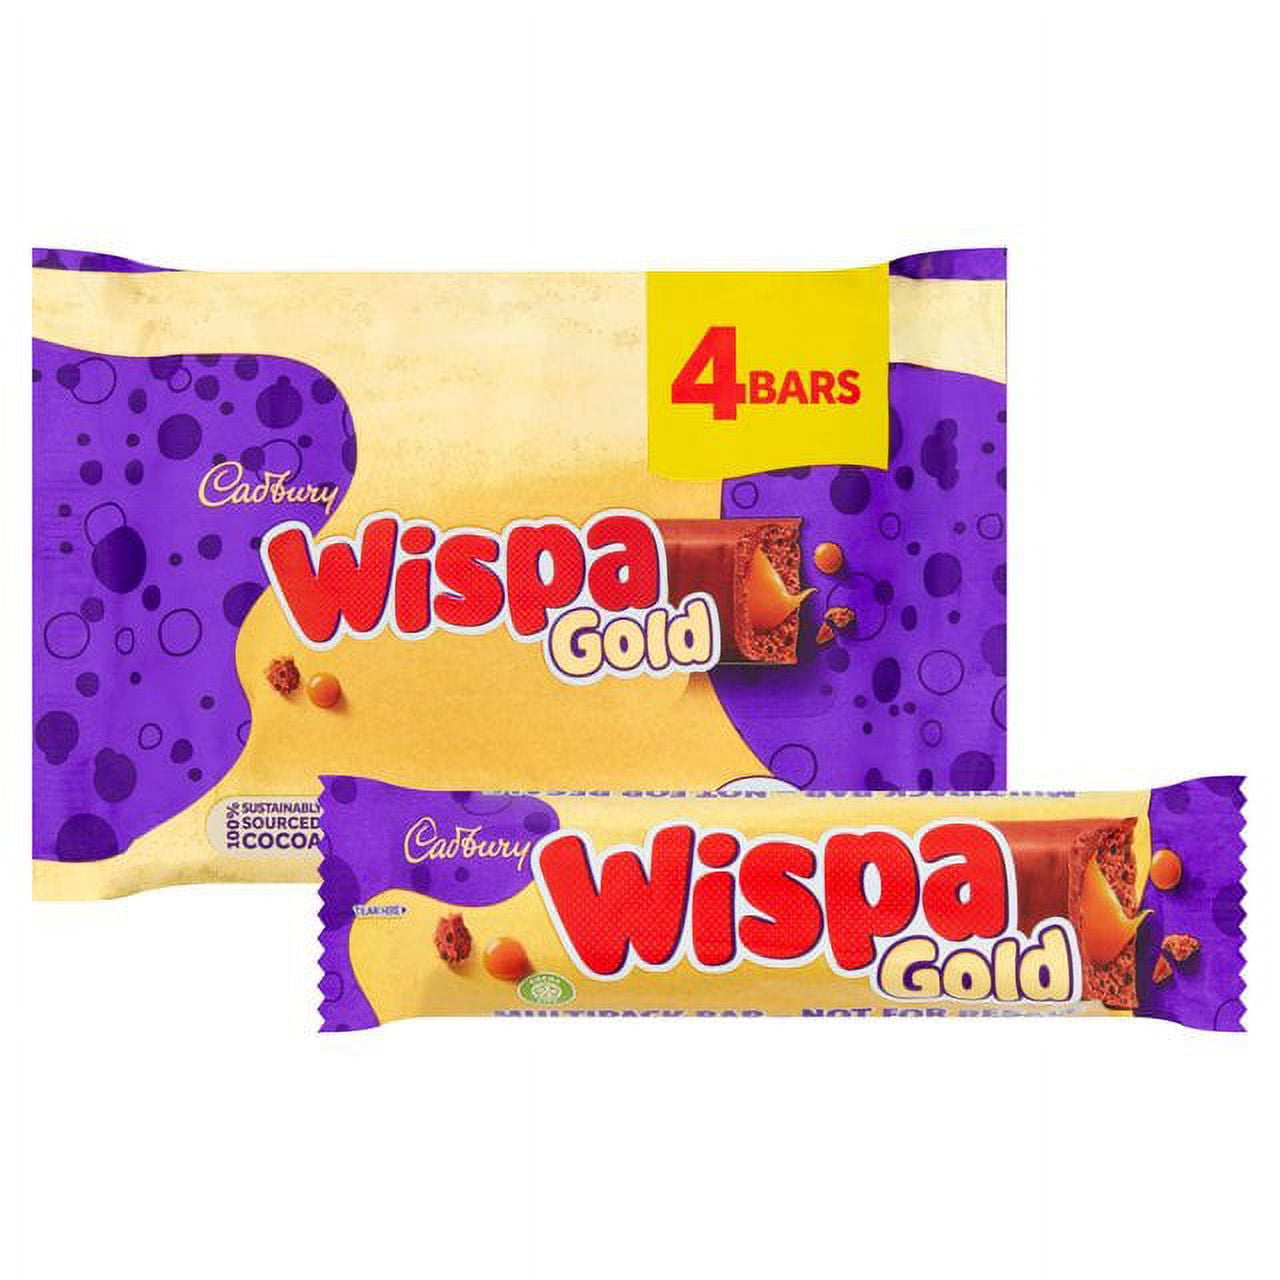 Cadbury Wispa Gold Chocolate Bar Multipack 153g ( 4 PACK ) - Free Shipping  - Made in the United Kingdom - Imported by Sentogo